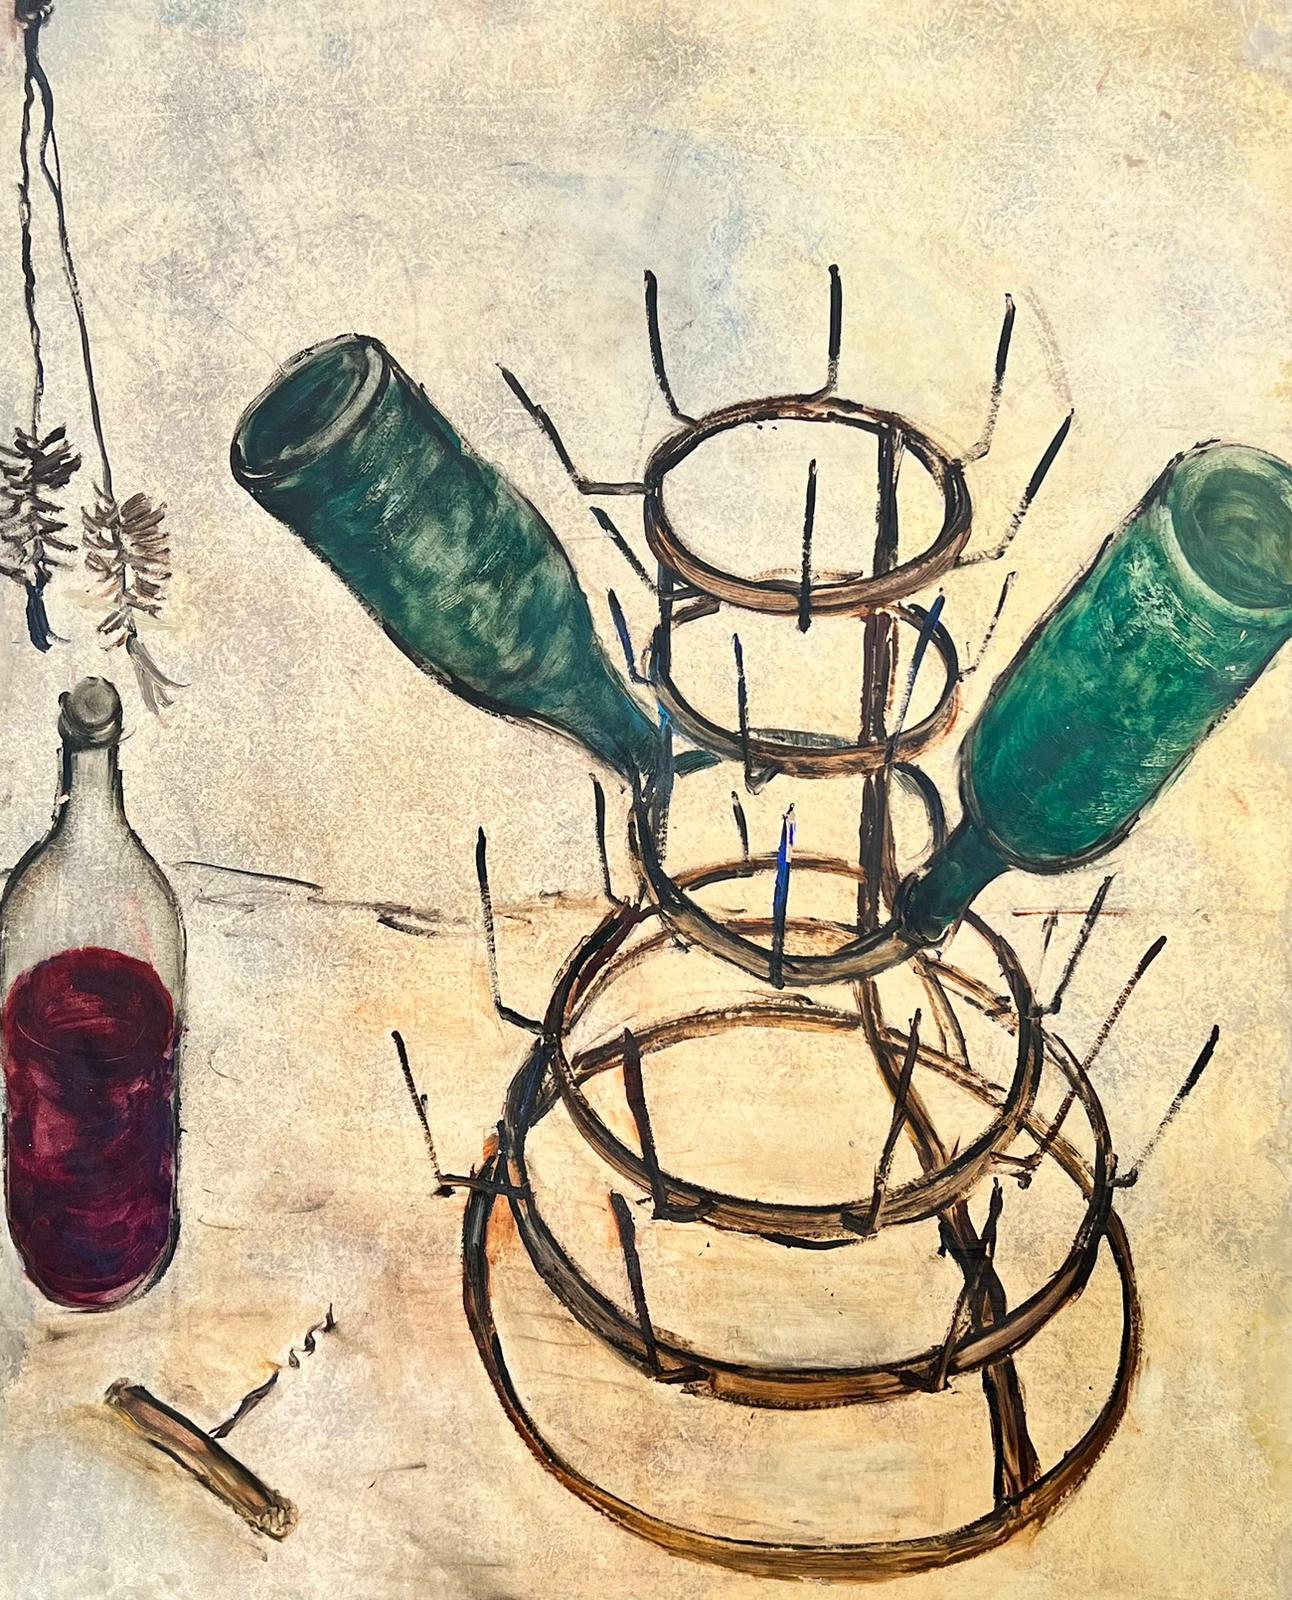 1960’s French Expressionist Oil Wine Bottles Drying on Metal Rack - Painting by Circle of Bernard Buffet